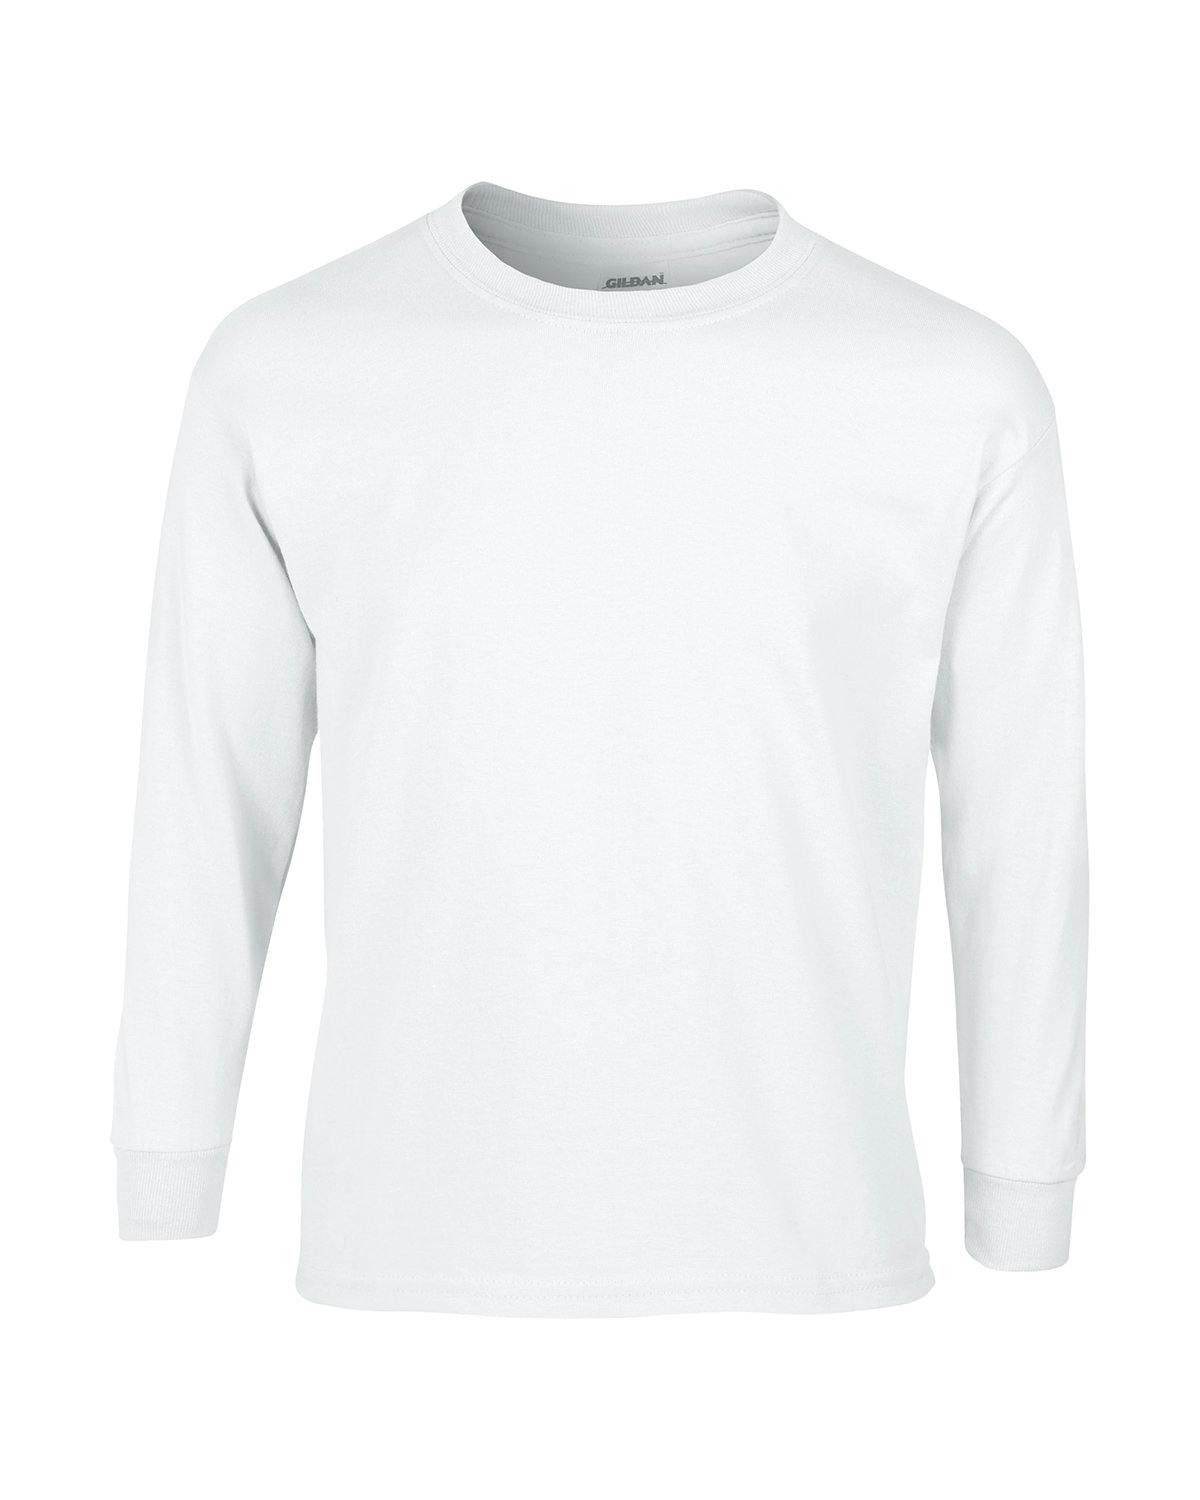 Image for Adult Ultra Cotton® 6 oz. Long-Sleeve T-Shirt